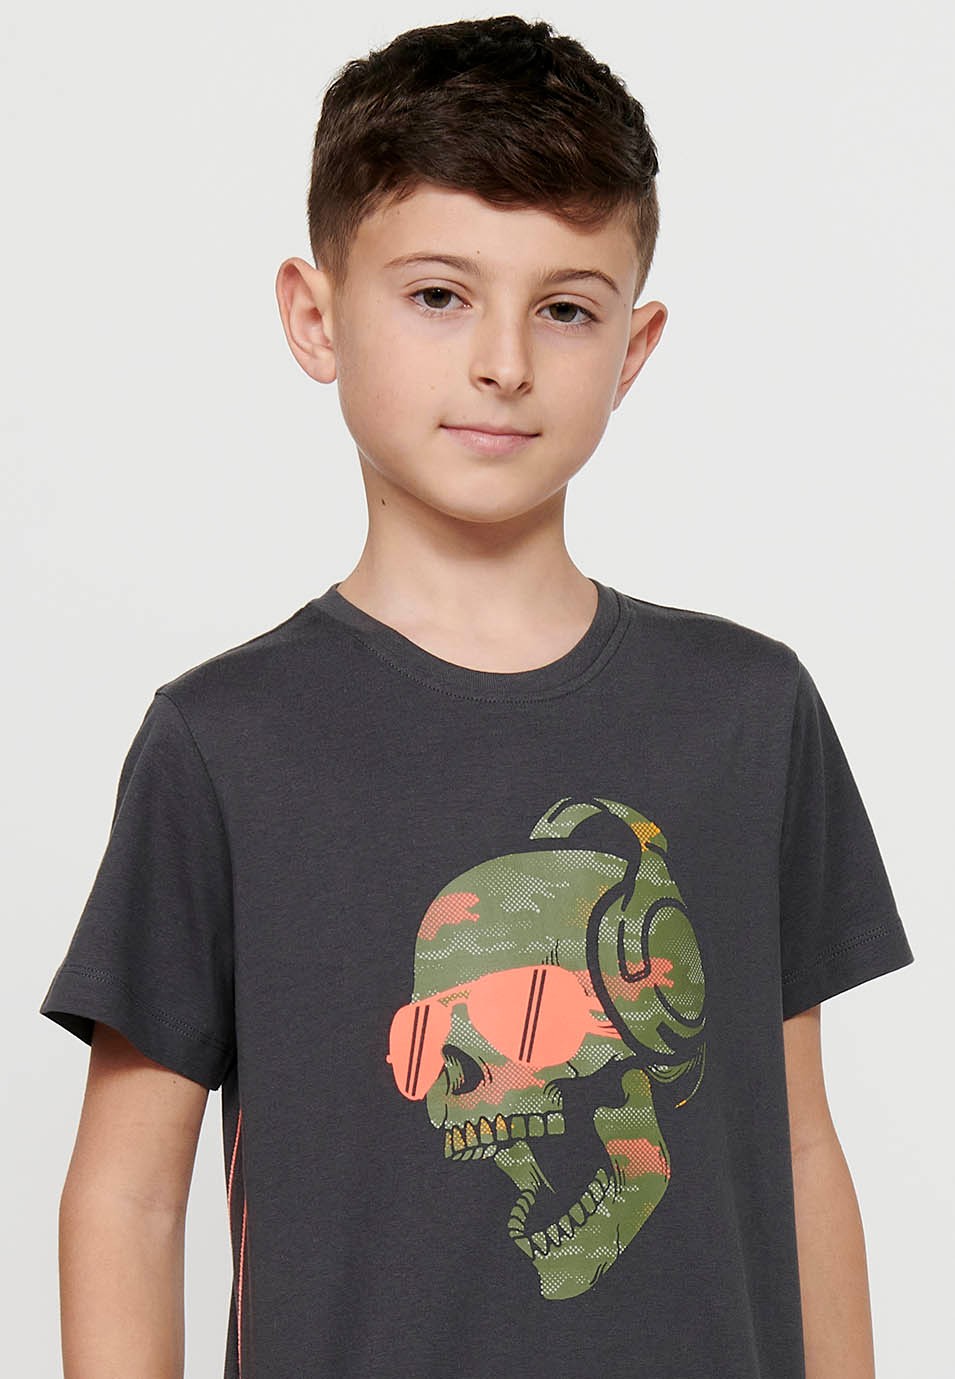 Short-sleeved Cotton Round Neck T-shirt with Dark Gray Front Print for Boys 3